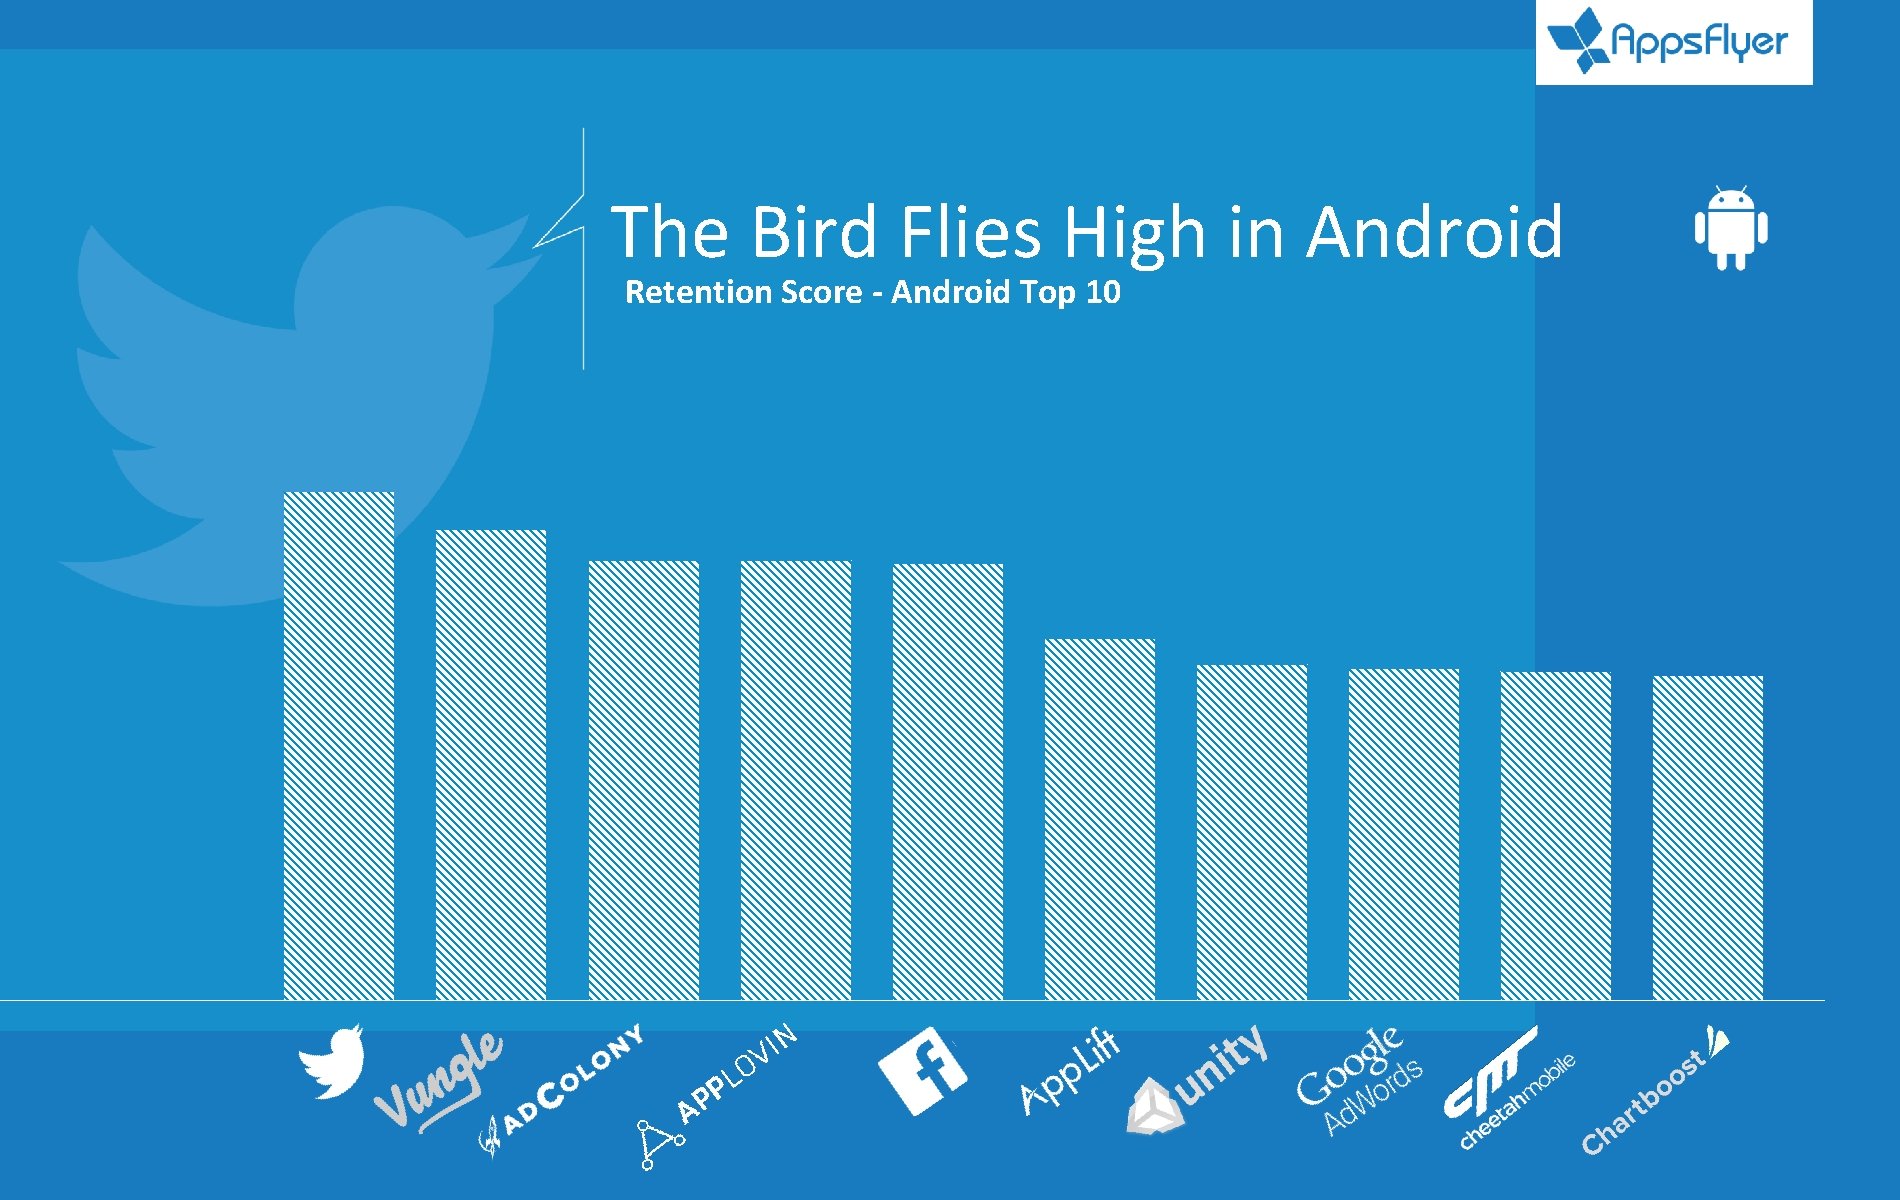 The Bird Flies High in Android Retention Score - Android Top 10 